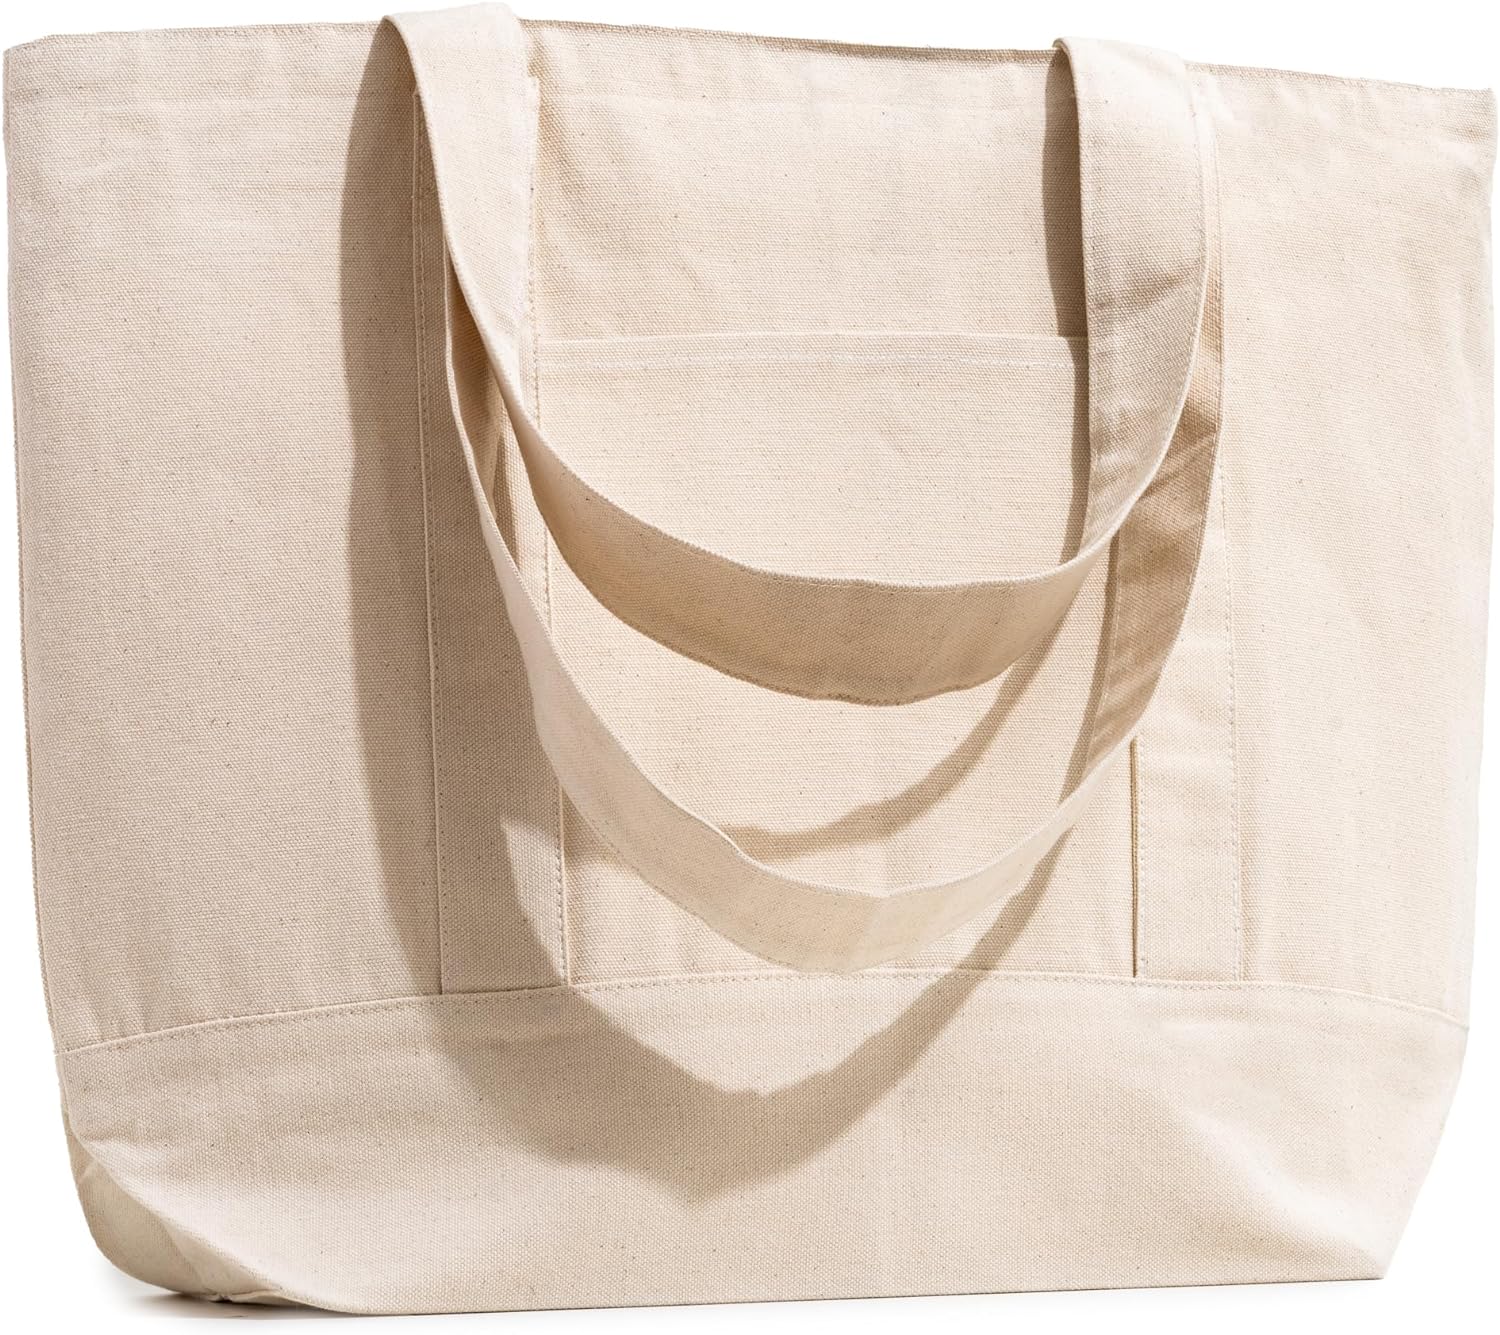 |Not Made In China| Organic Cotton Canvas Tote With Zippered Top, Front Pocket, Heavy Duty Reusable Shopping Bag